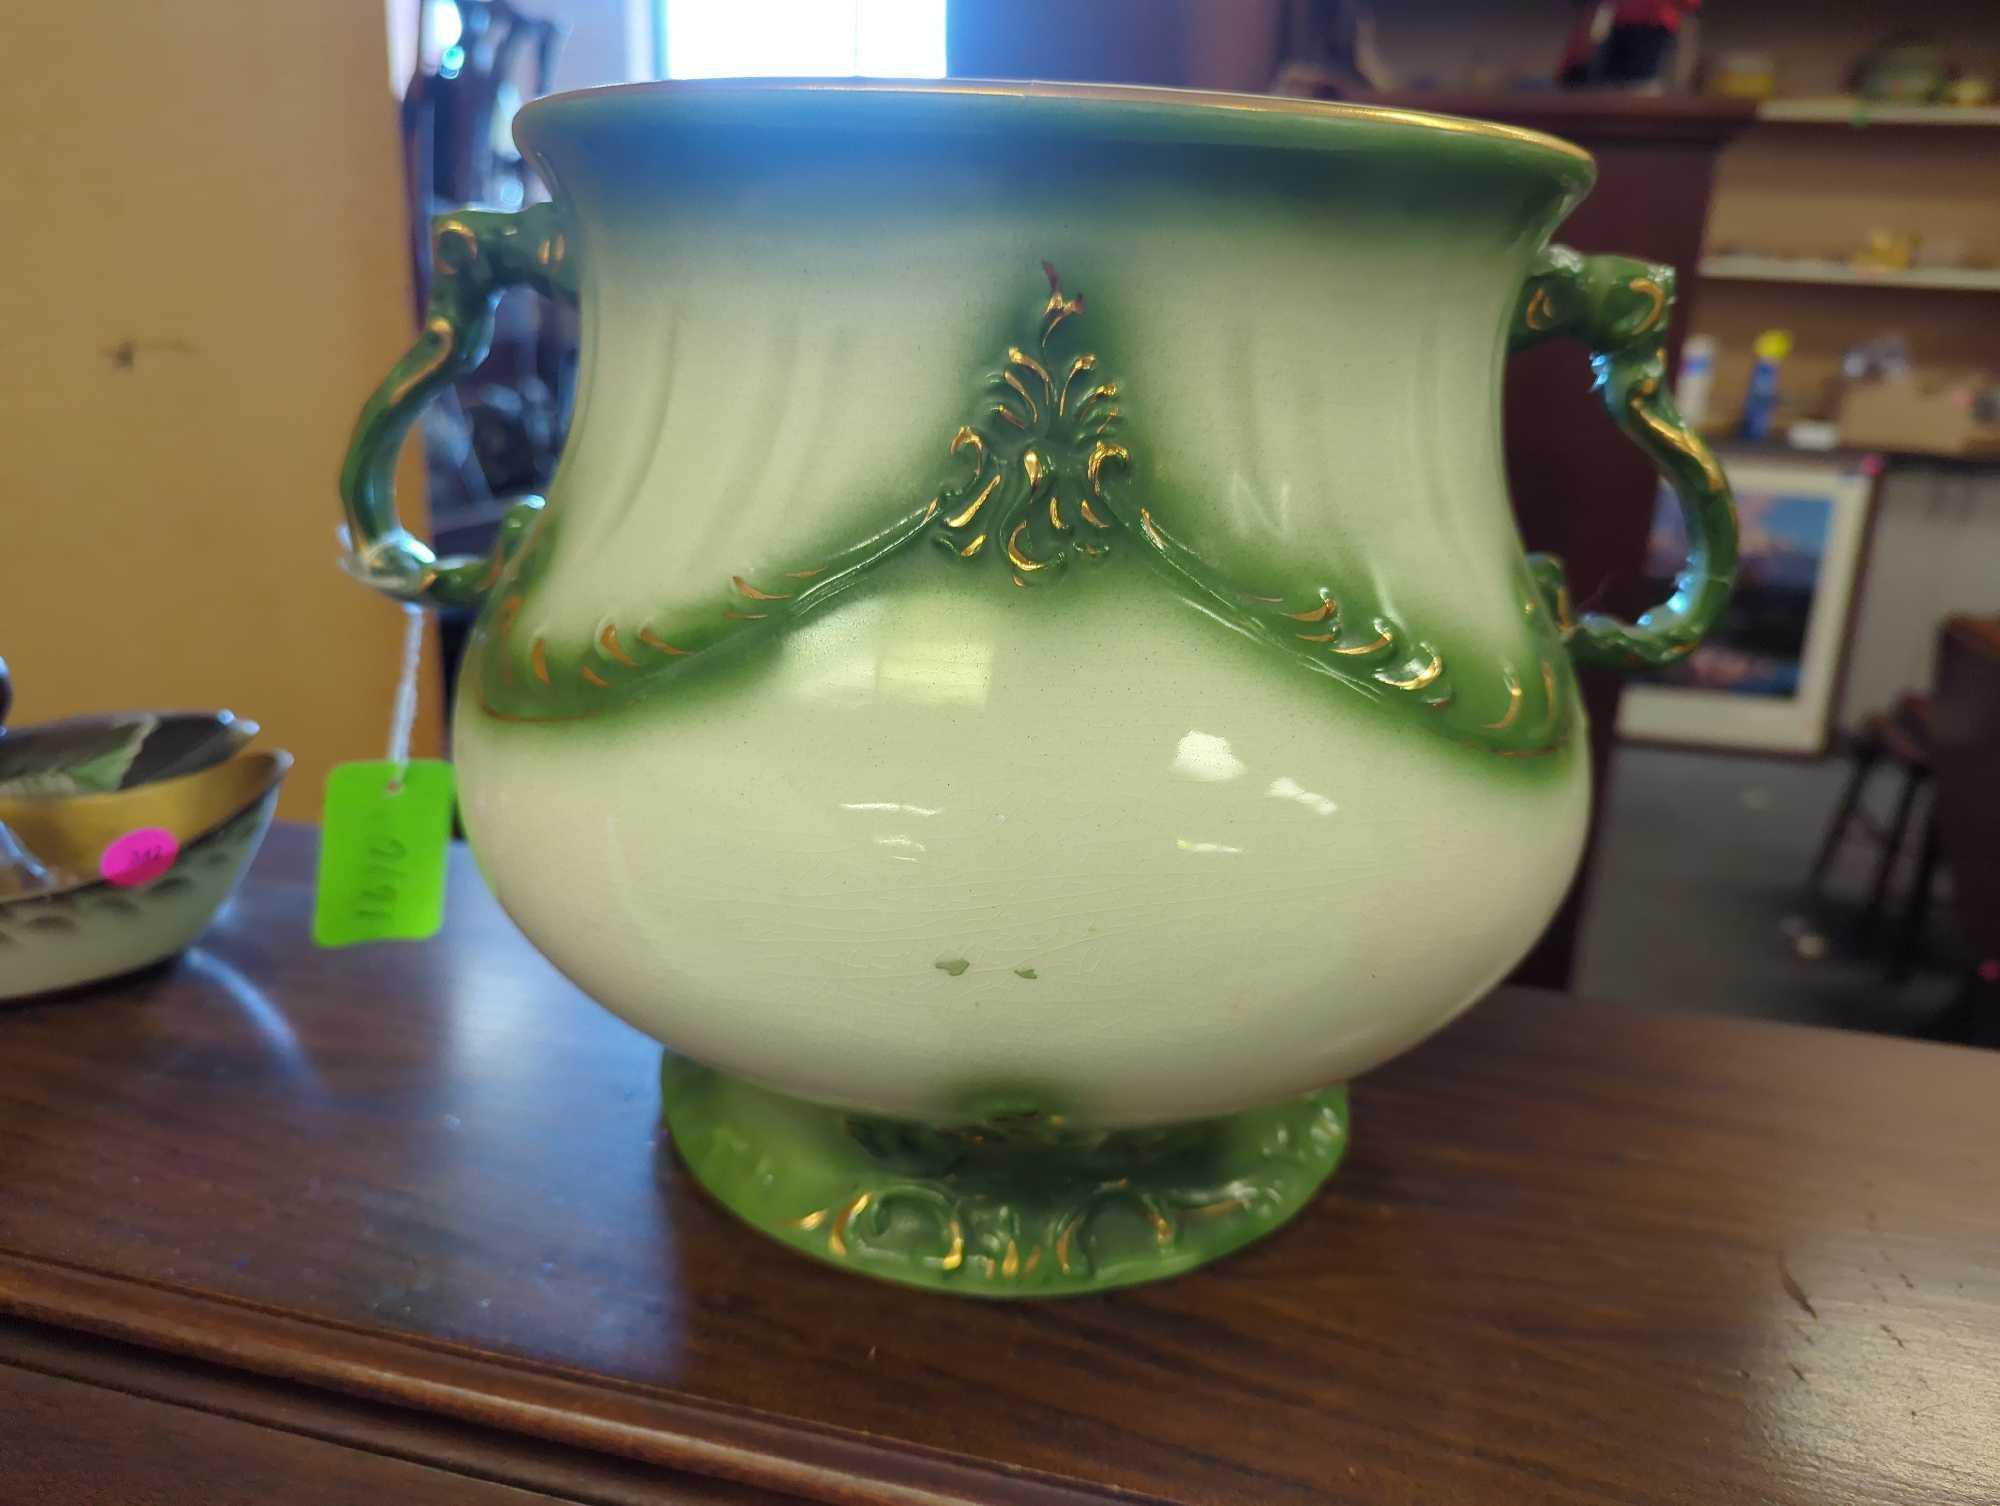 Royal China International Ceramic Planter Pot, With 2 Side Handles, One handle is Repaired with